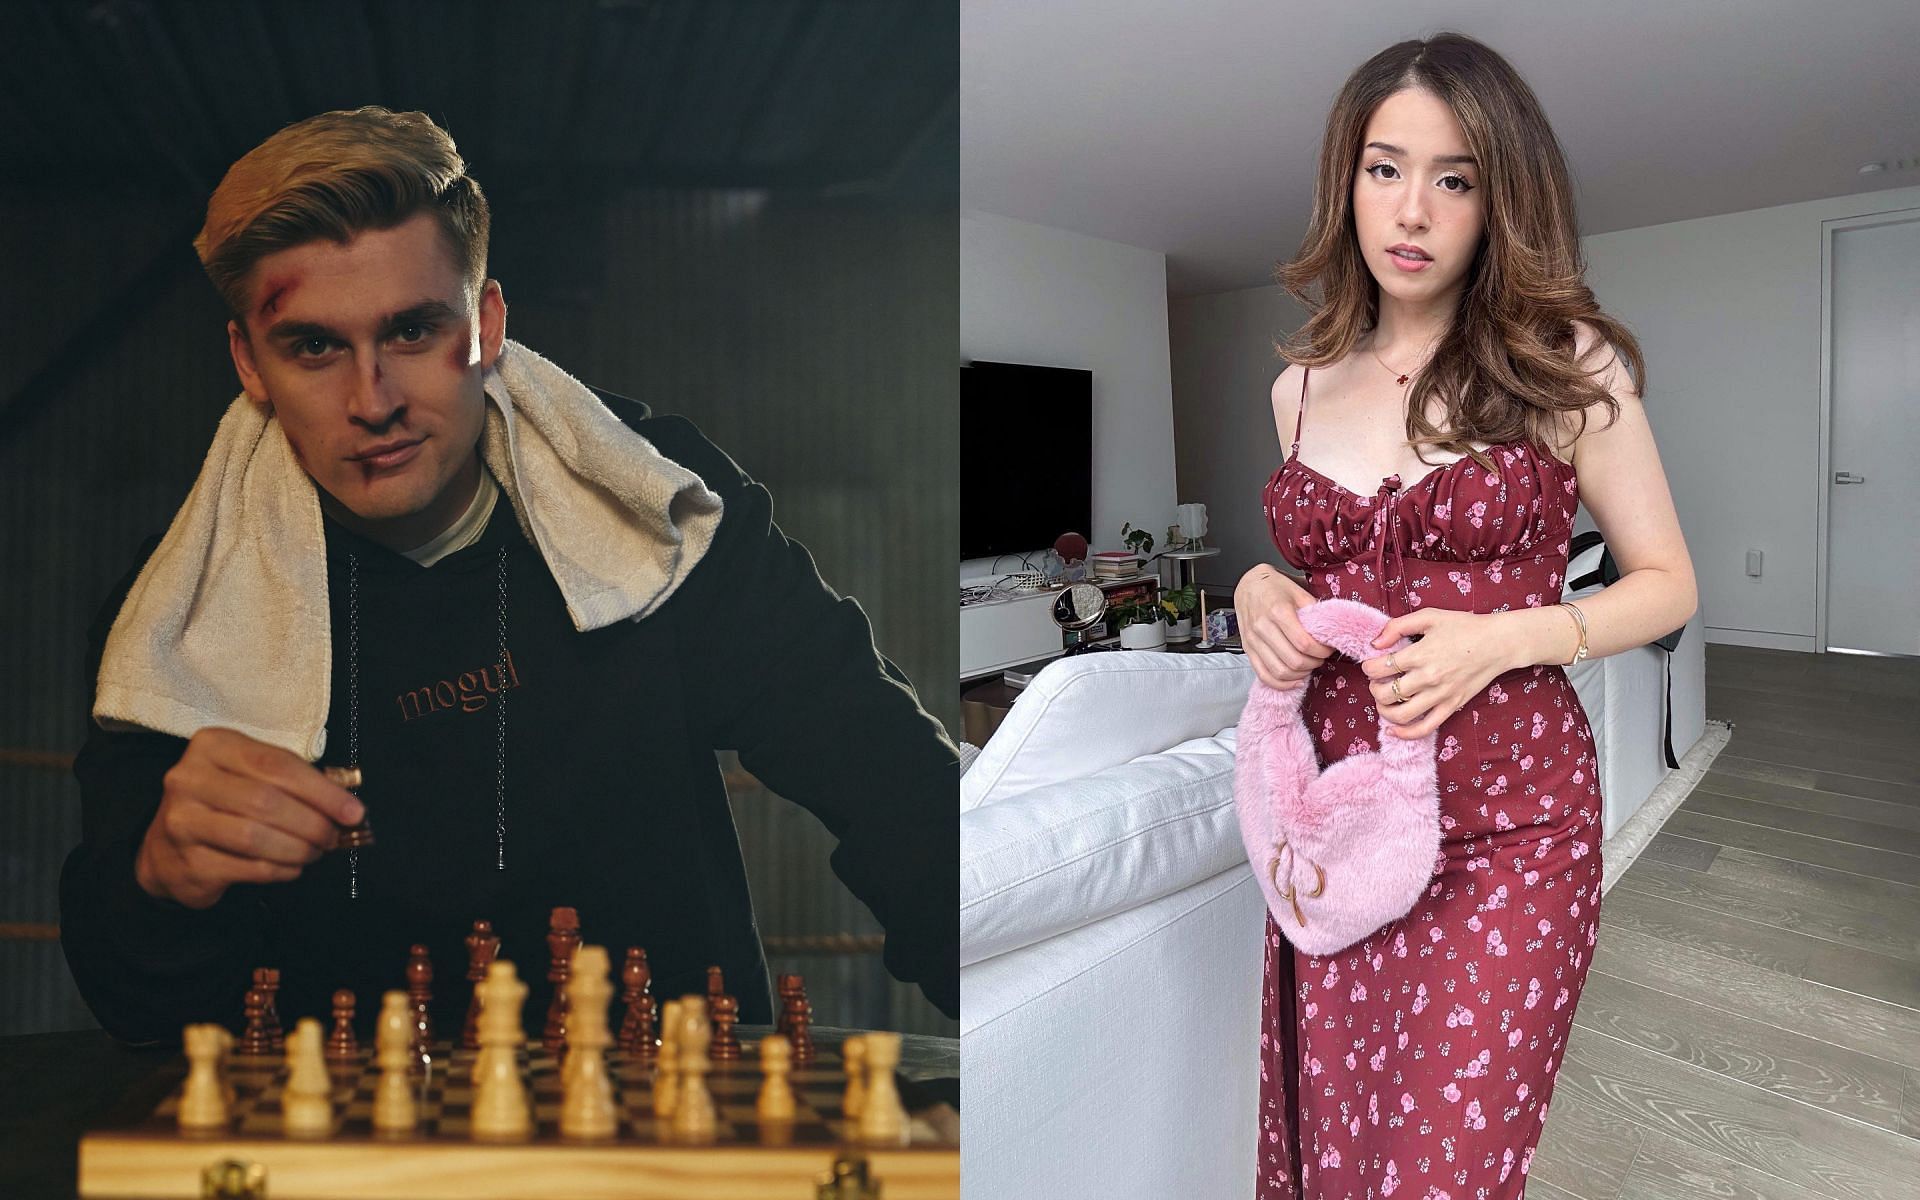 Pokimane talks about &quot;strategical&quot; ways of defeating Ludwig in a boxing match (Images via Ludwig and Pokimane/Twitter)